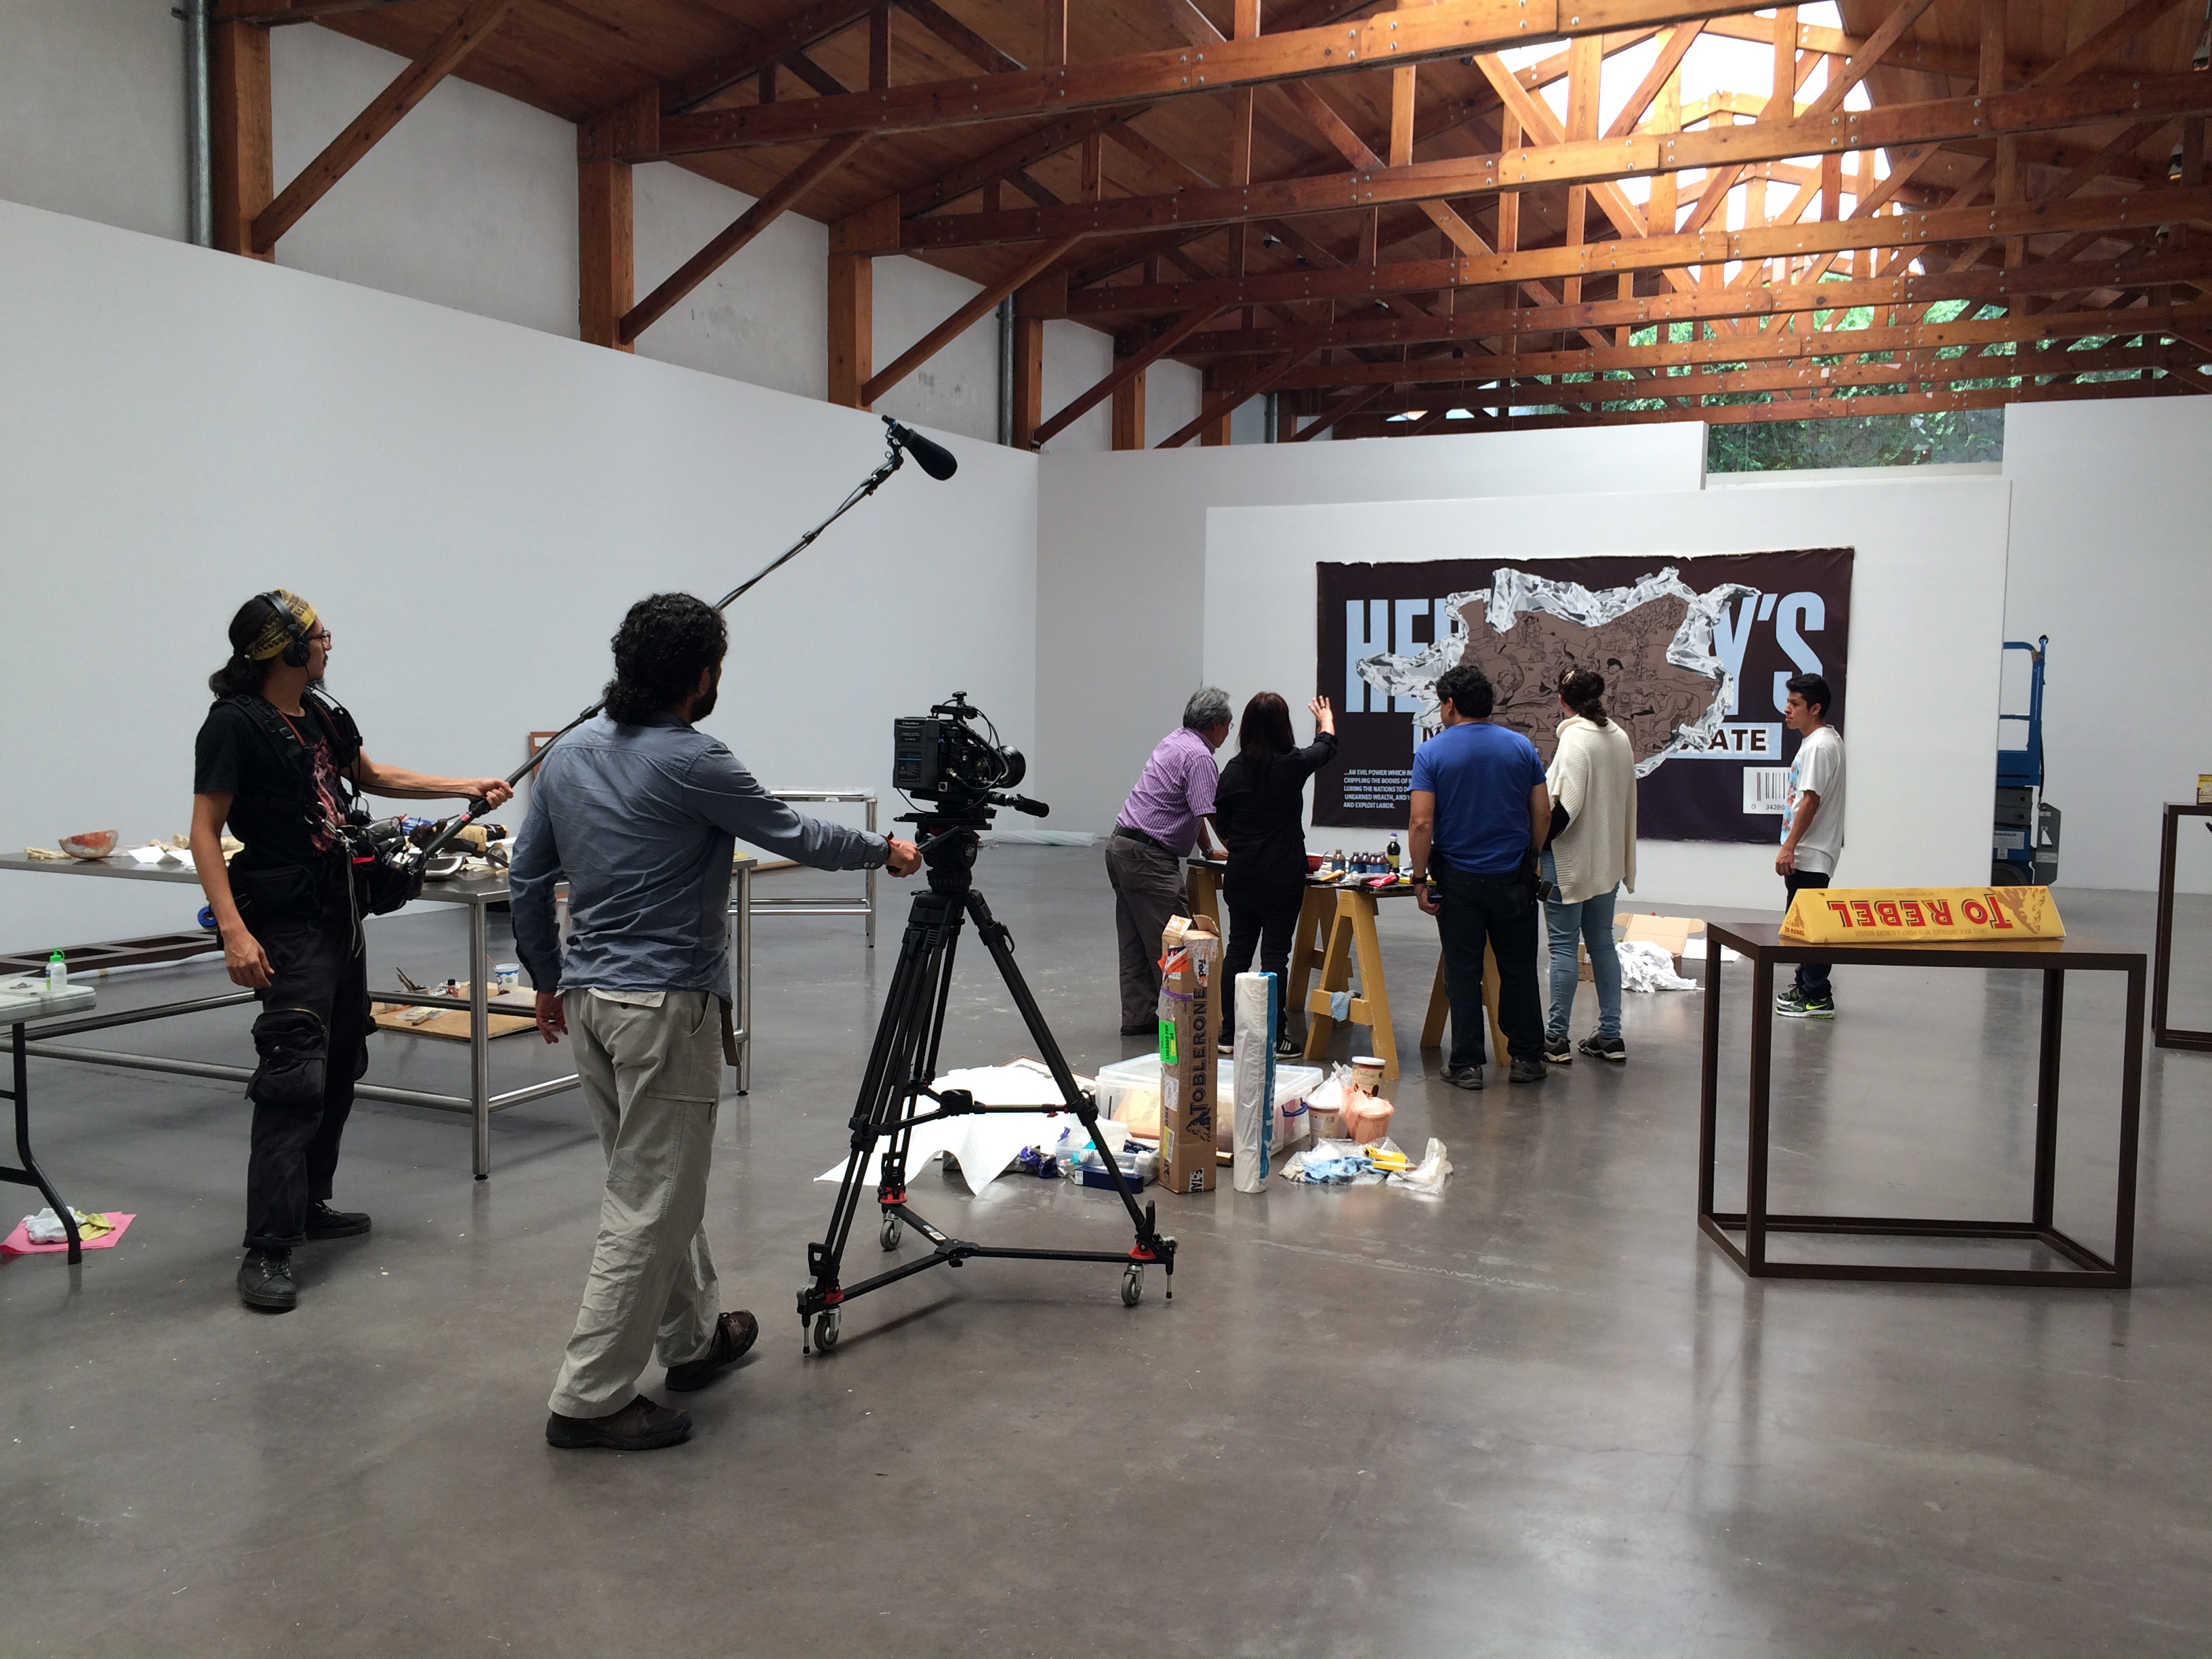 ART21 filming Minerva Cuevas installing her work in the exhibition Feast and Famine at Kurimanzutto in Mexico City, Mexico, 2015. Behind the scenes of ART21’s series Art in the Twenty-First Century, Season 8, 2016. Photo: Ian Forster. © ART21, Inc. 2016.